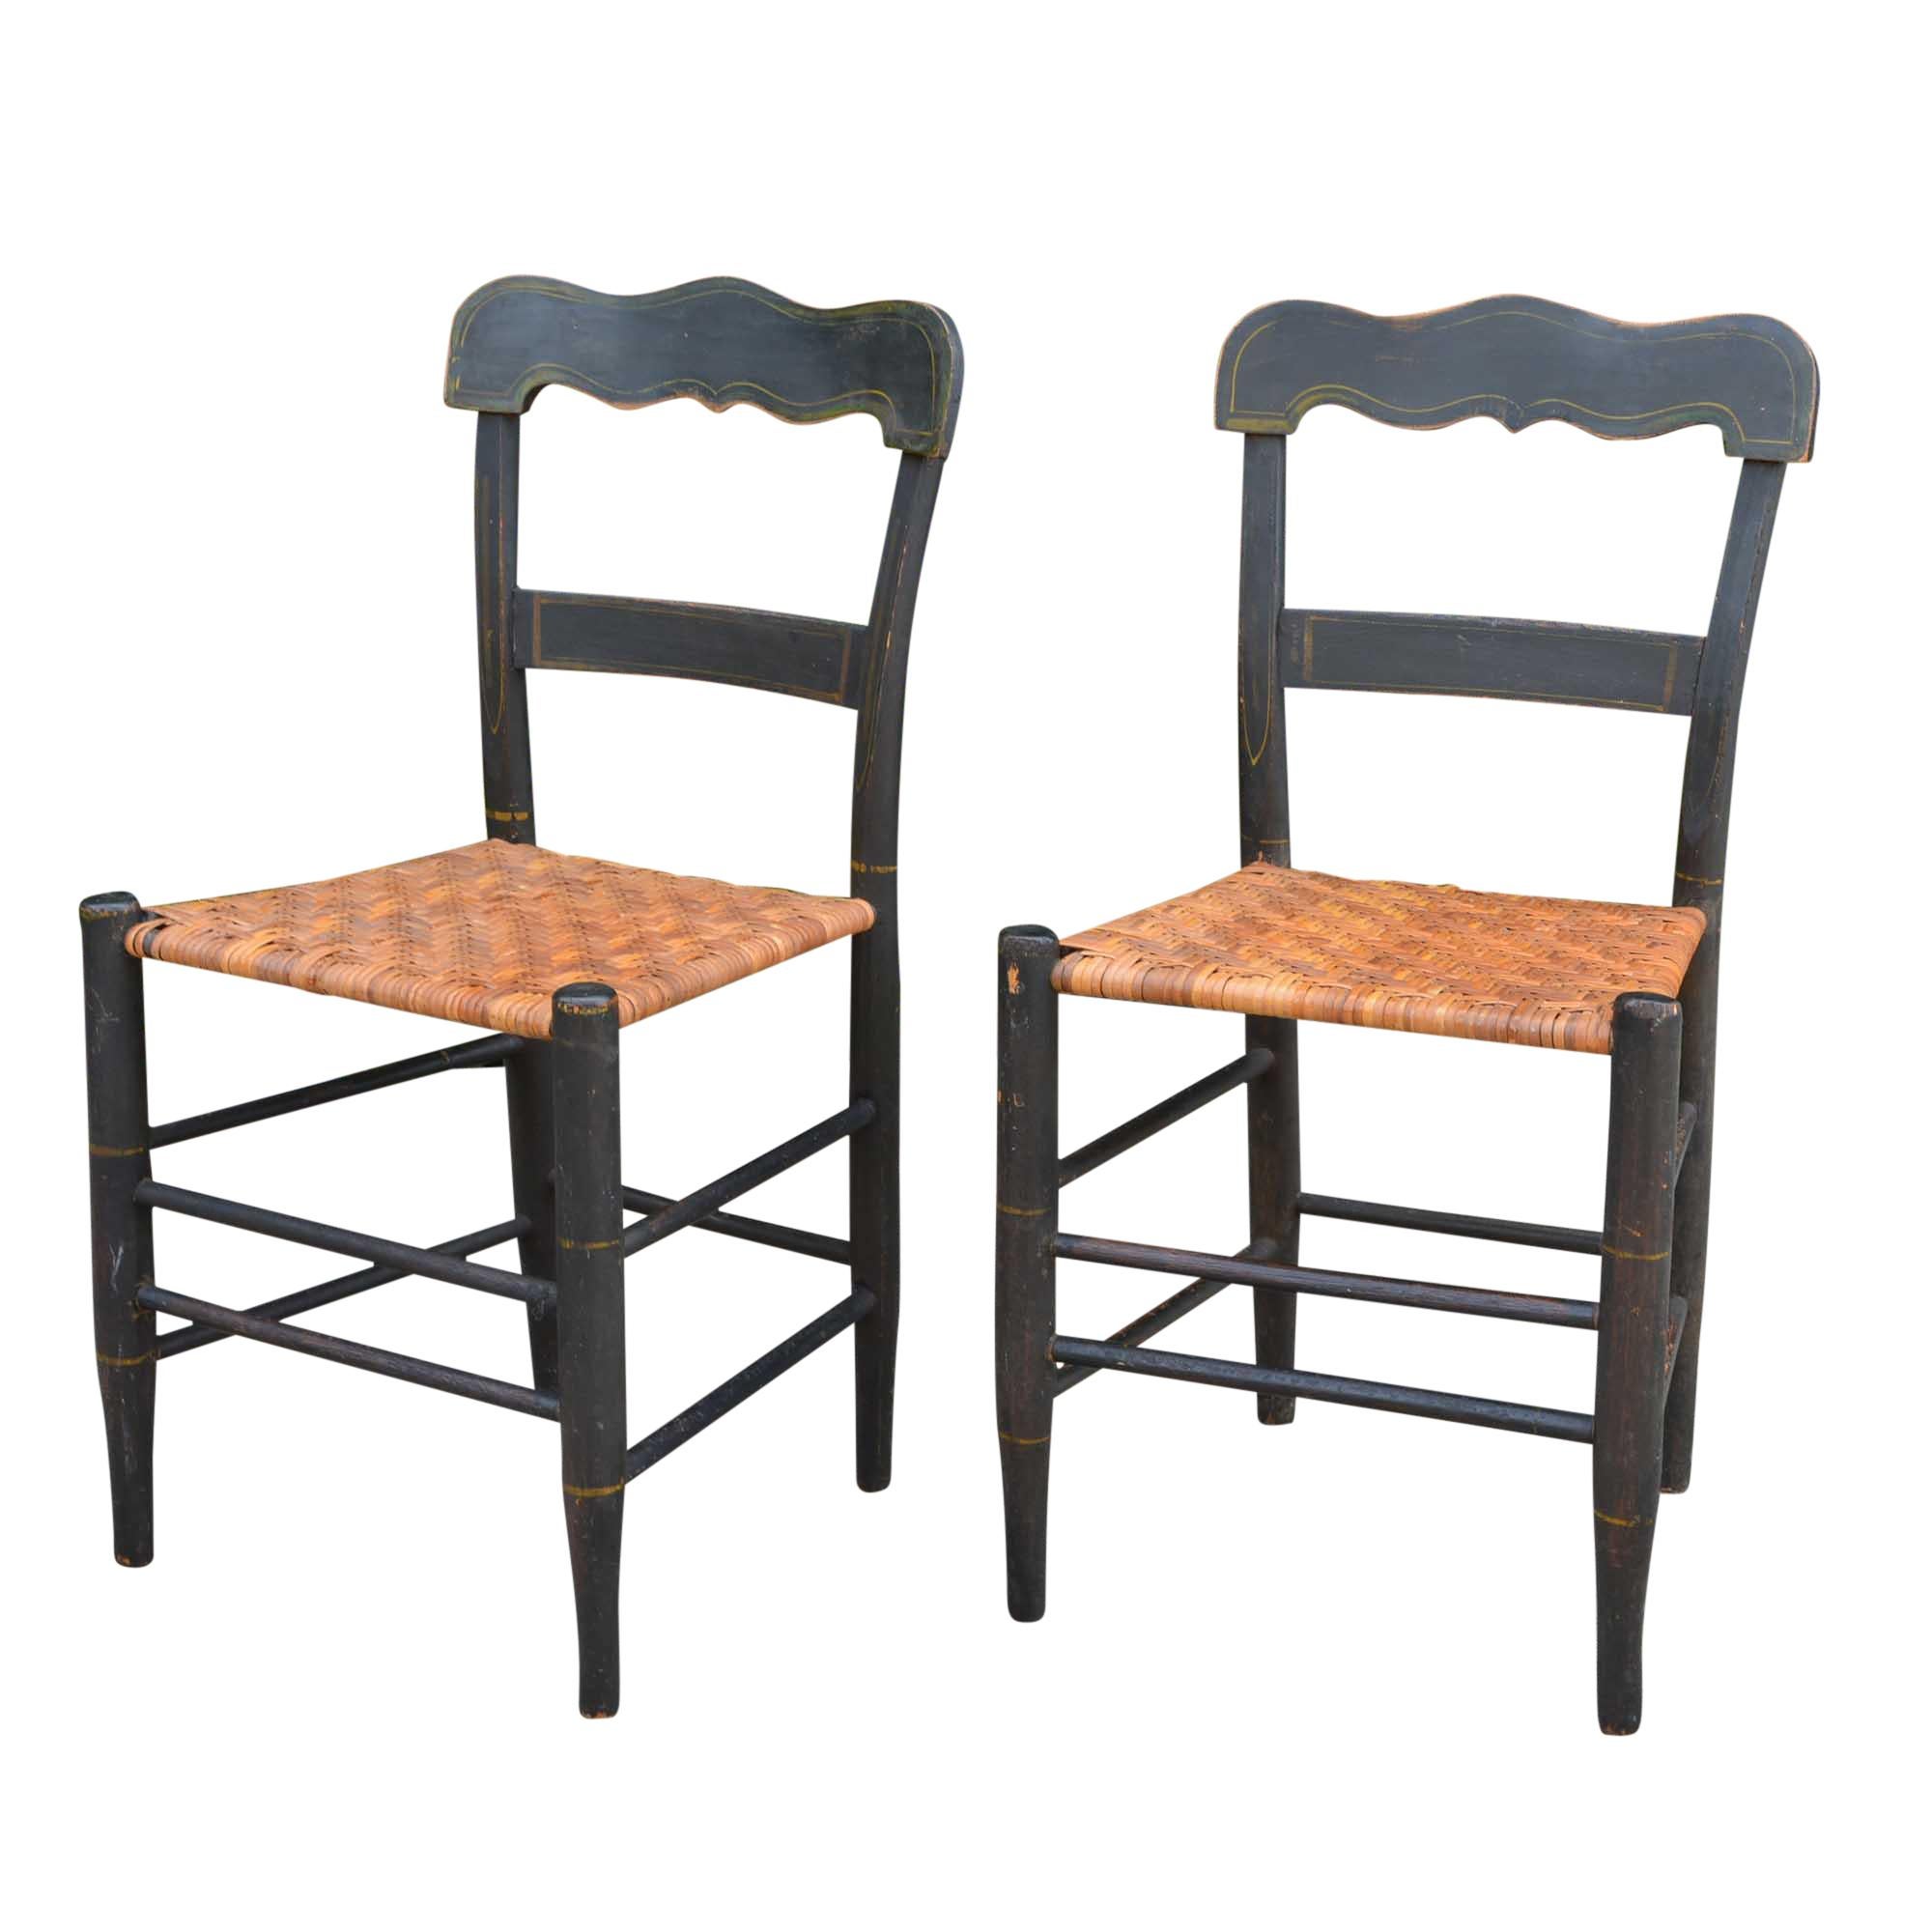 These chairs came from an estate in the village of Granville, Ohio. The caned seats have been really well cared for and are in excellent condition. The frames are painted black with a hand-painted design on the back supports.

For those not